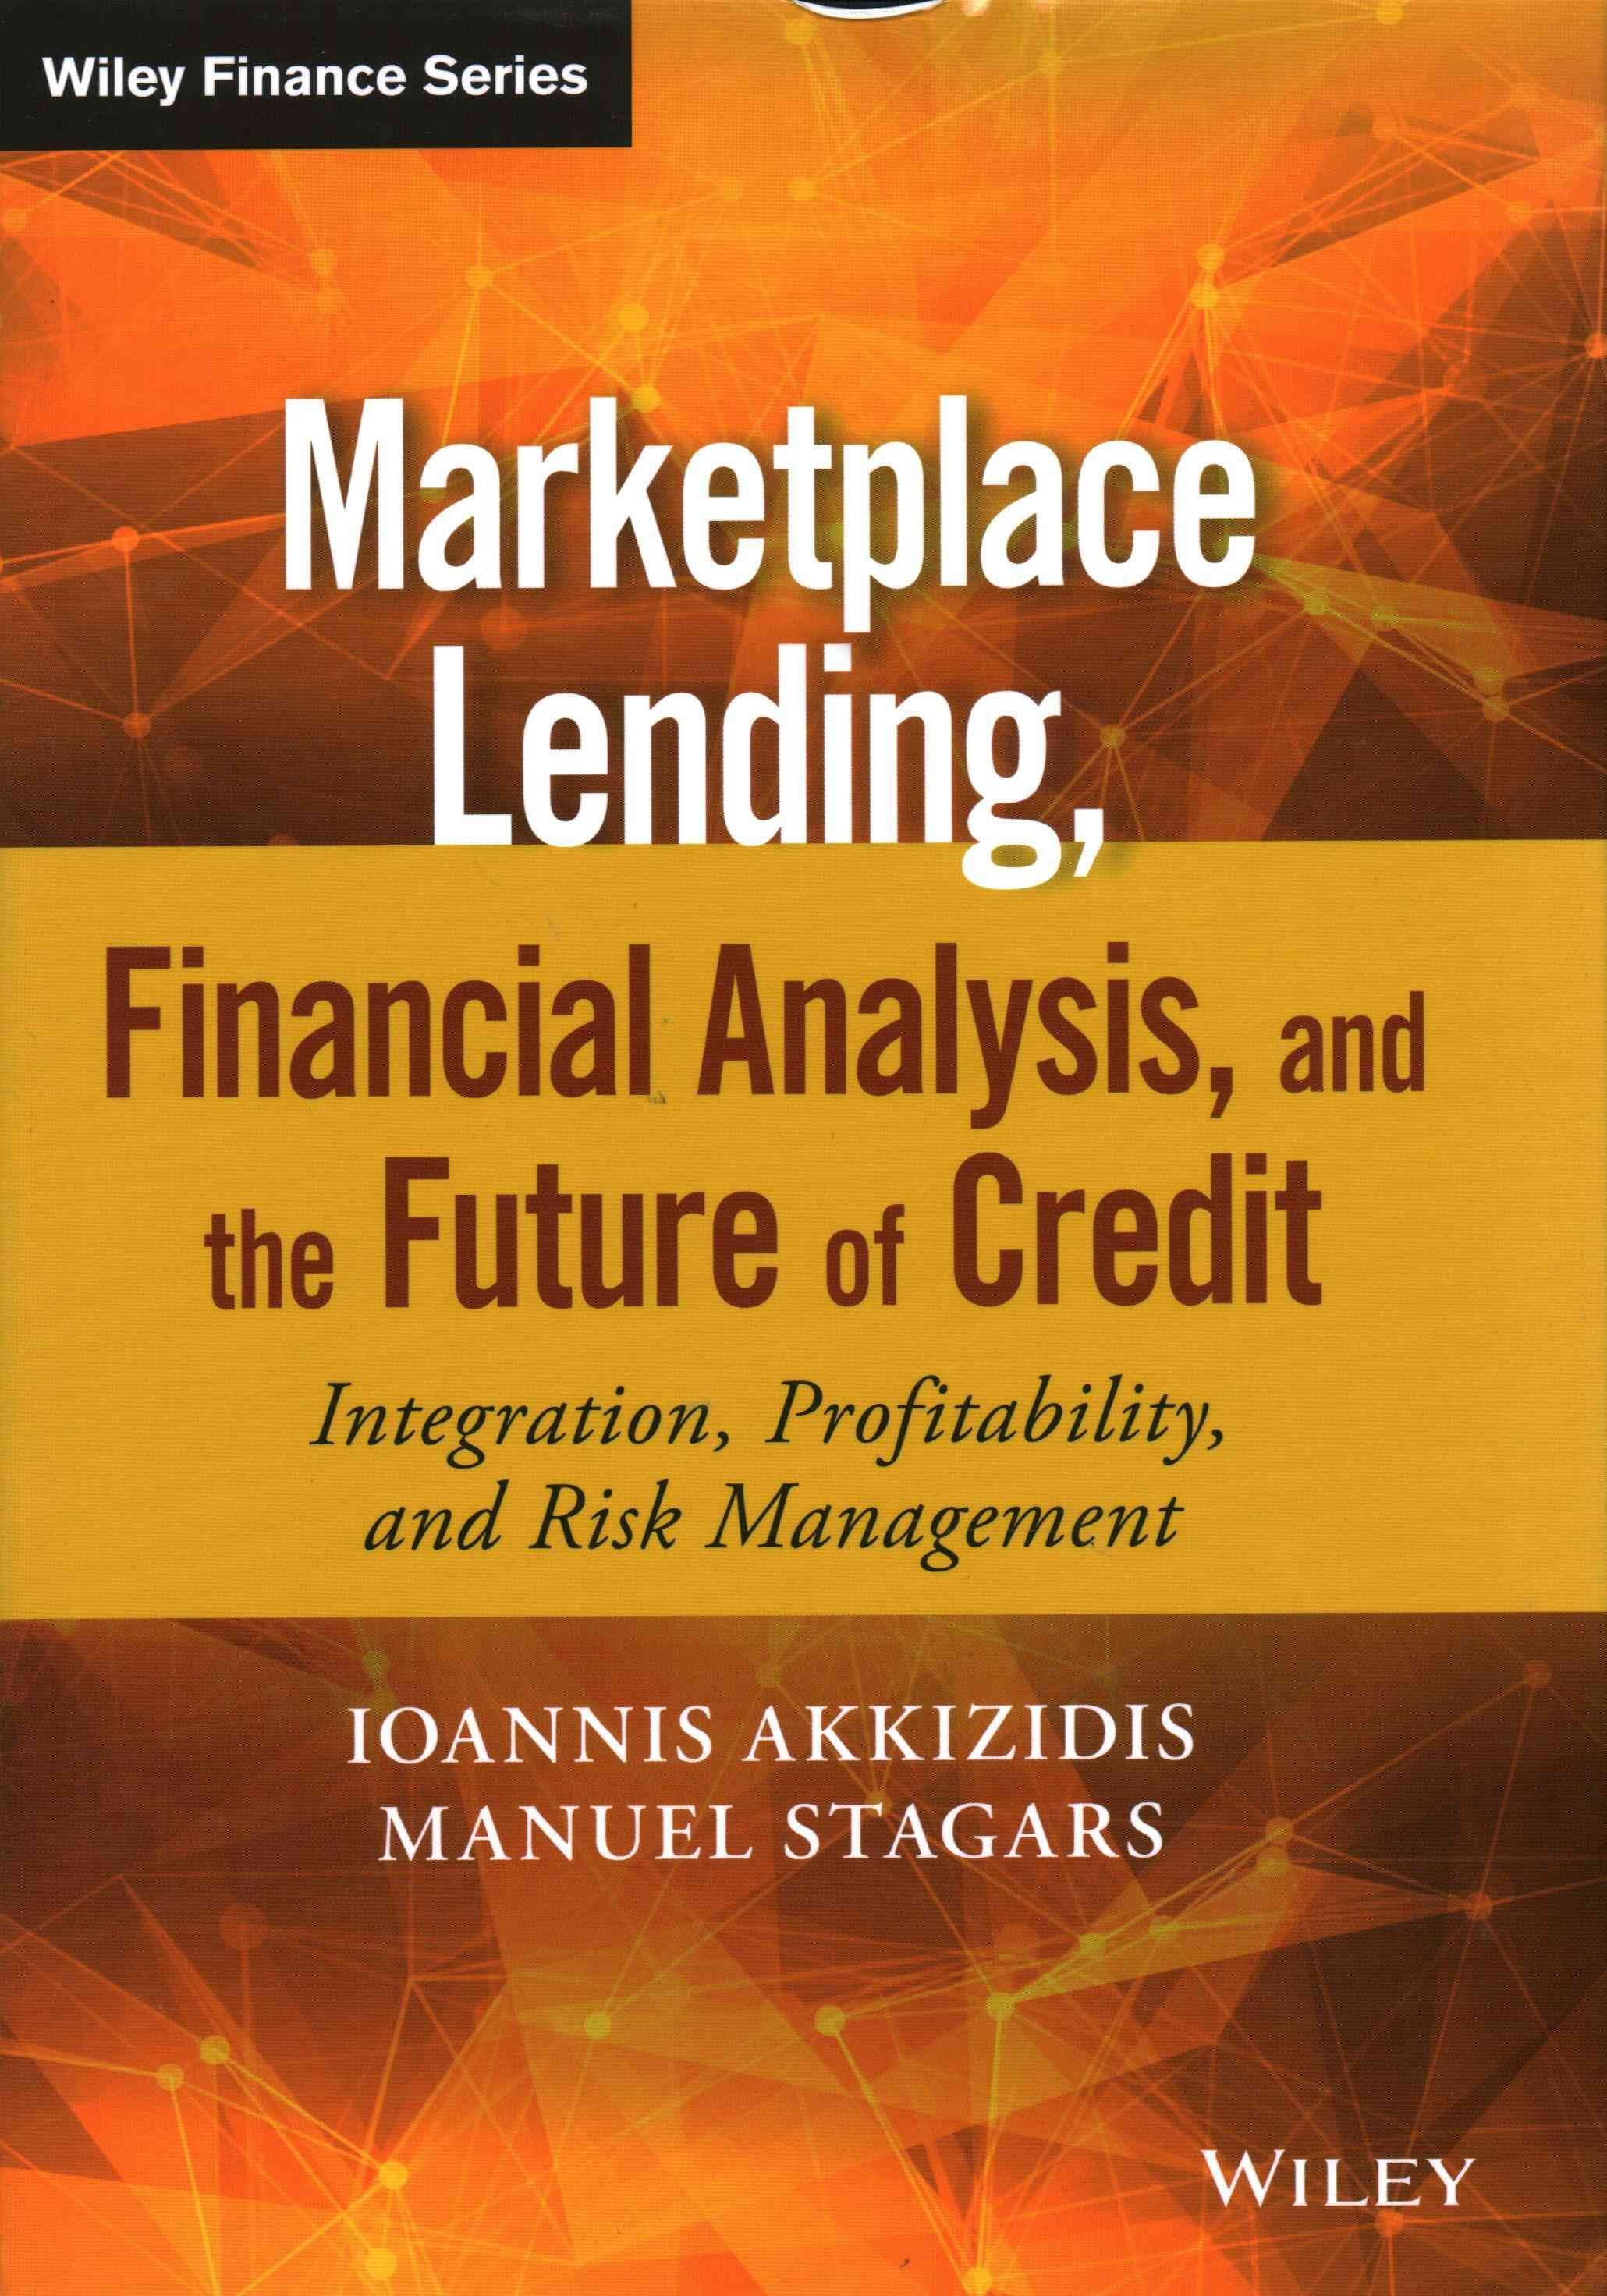 Marketplace Lending, Financial Analysis, and the Future of Credit - Integration, Profitability, and Risk Management + Website